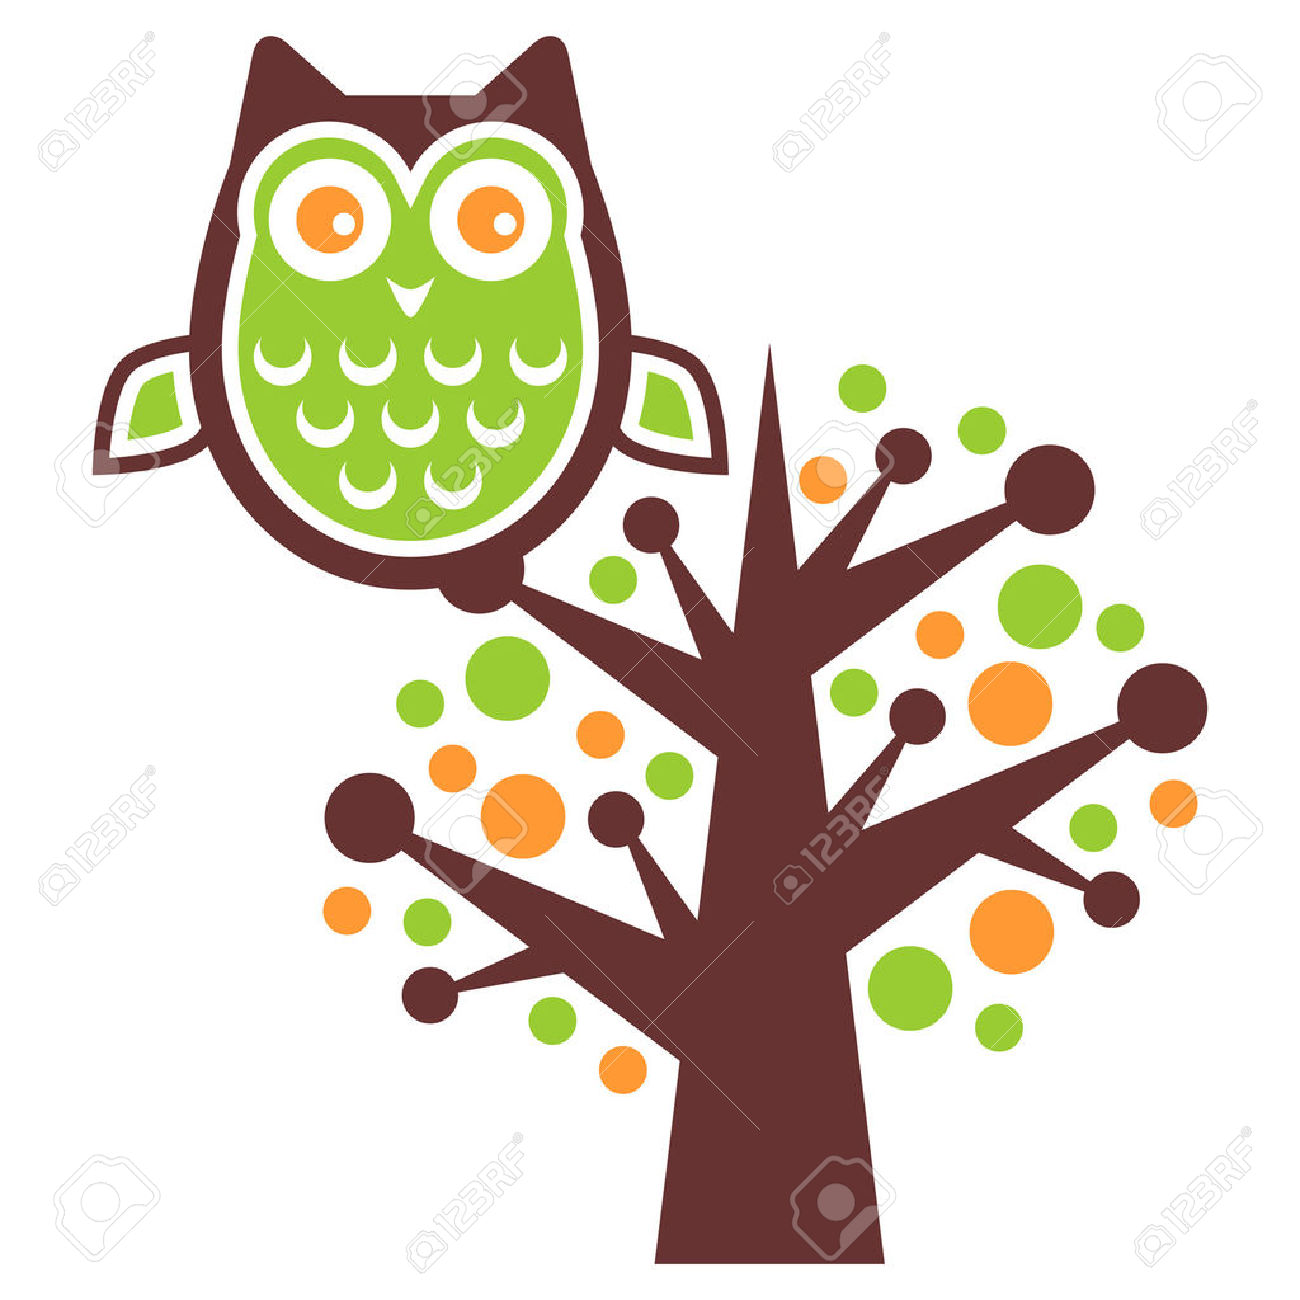 Owl Stand Alone On A Tree Brunch Royalty Free Cliparts, Vectors.